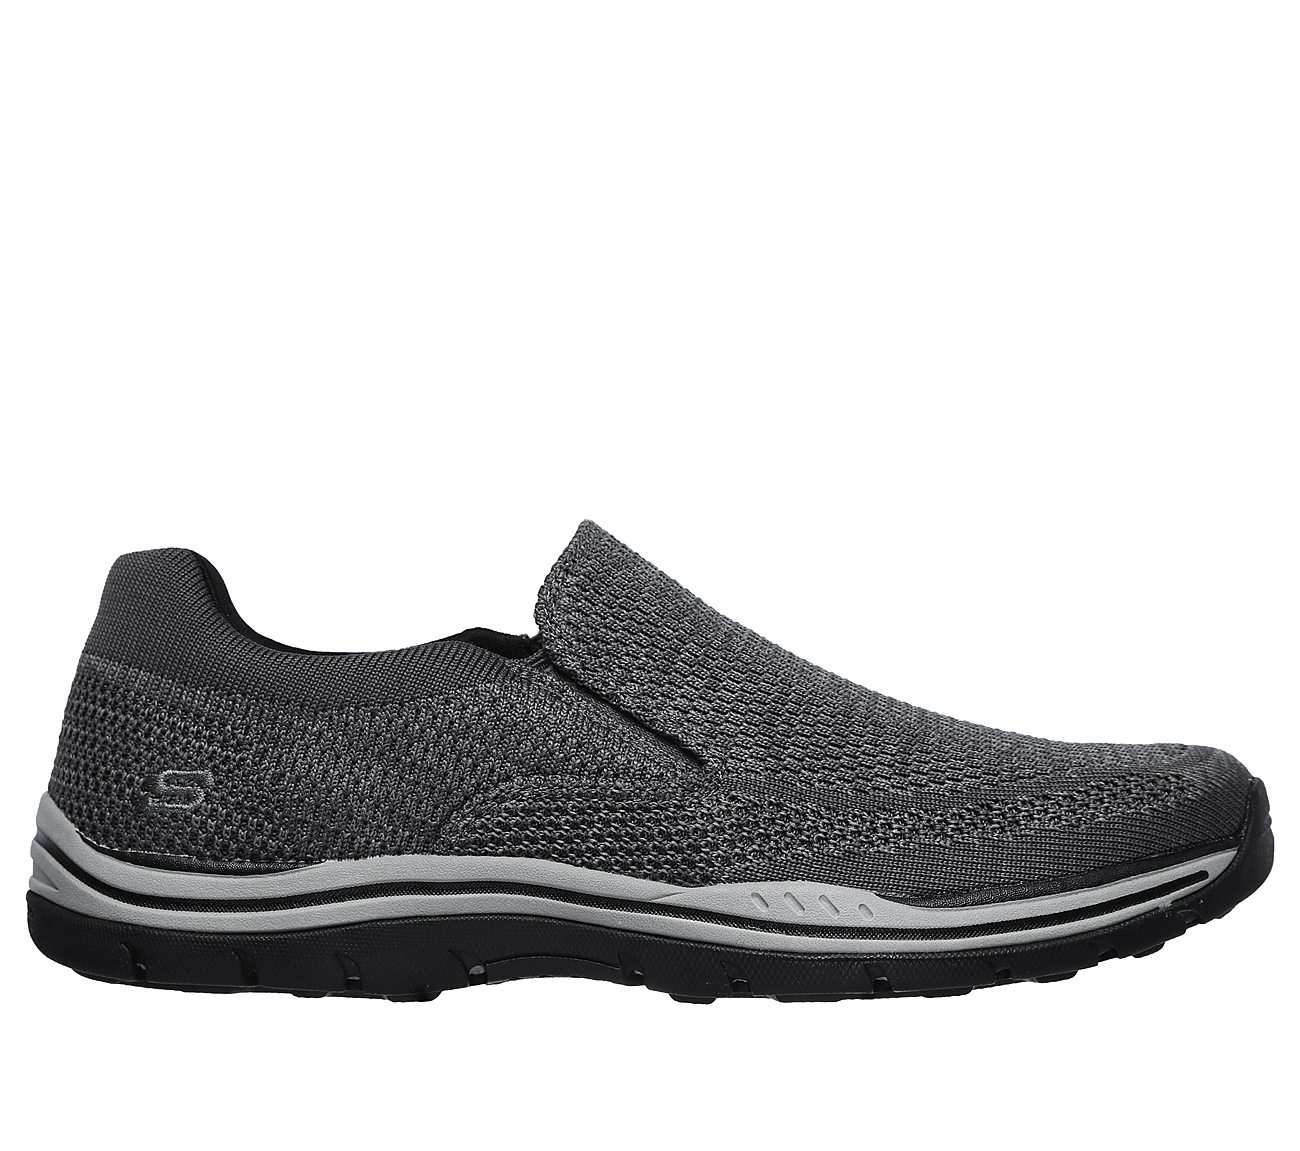 Buy SKECHERS Relaxed Fit: Expected - Gomel USA Casuals Shoes